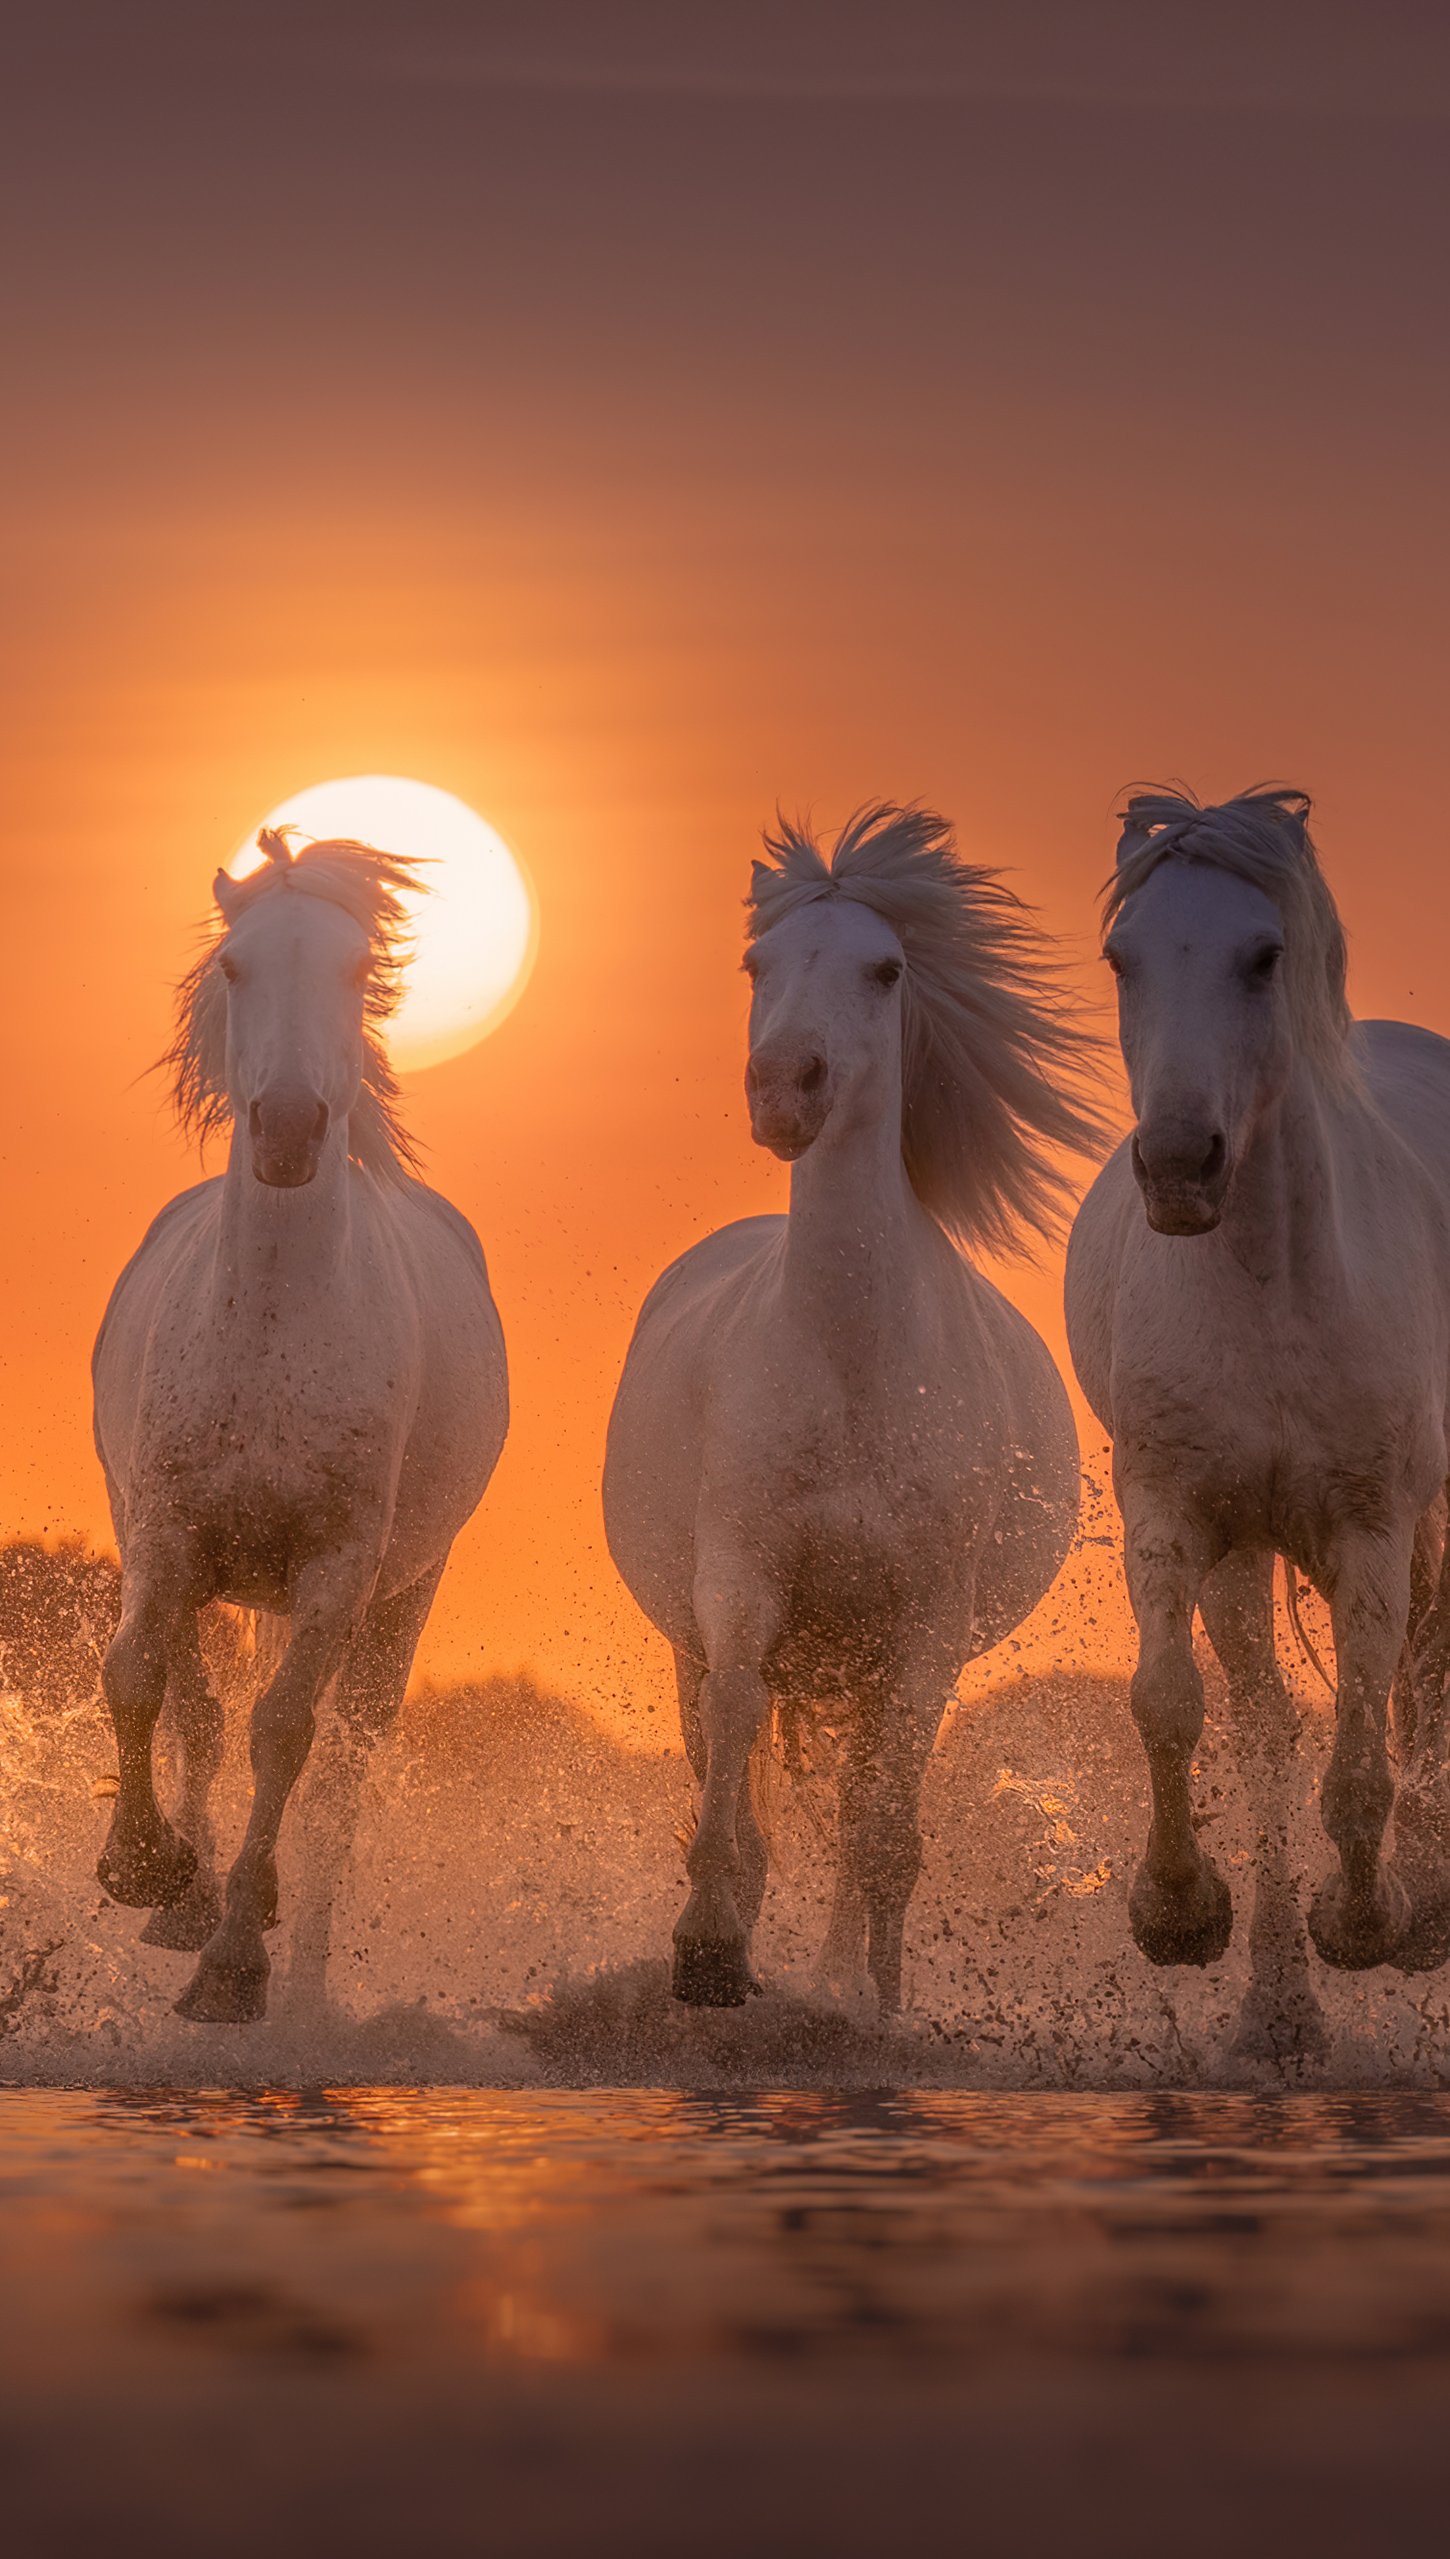 White horses at sunset in the beach Wallpaper 4k Ultra HD ID:10493